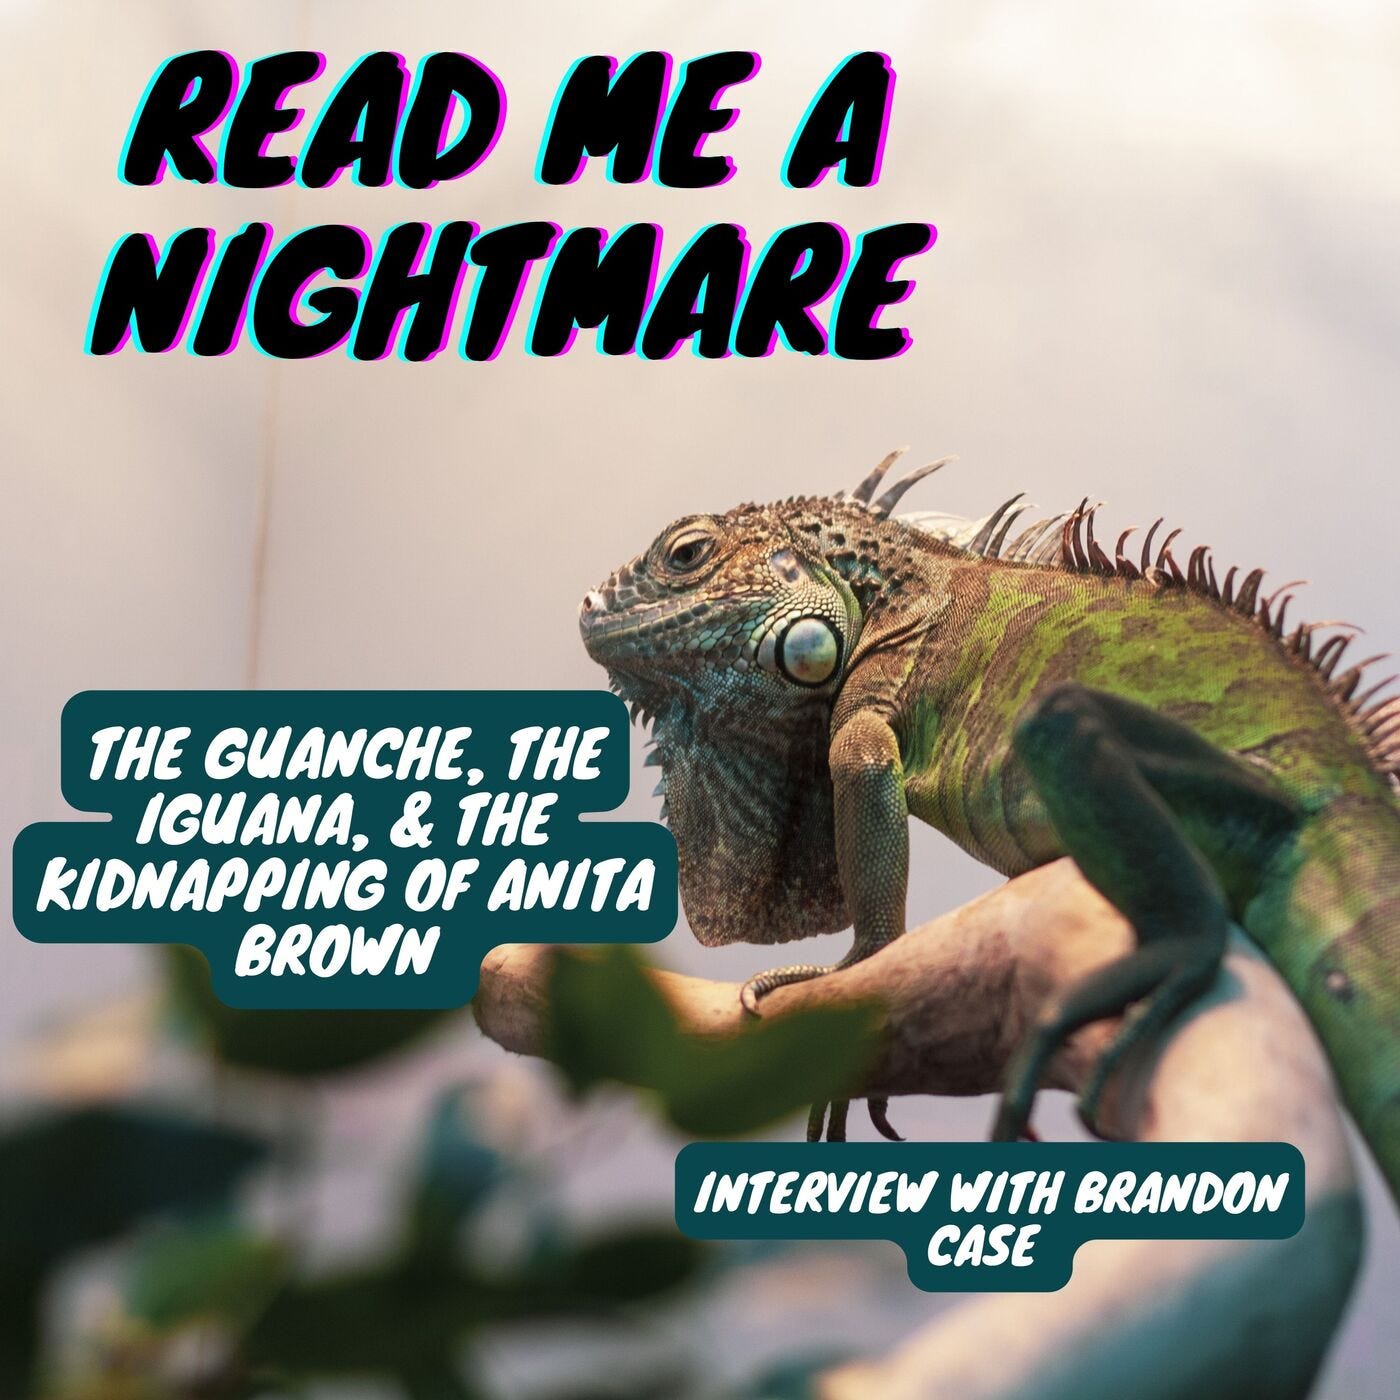 31 "The Guanche, the Iguana, & the Kidnapping" PLUS Interview with Brandon Case